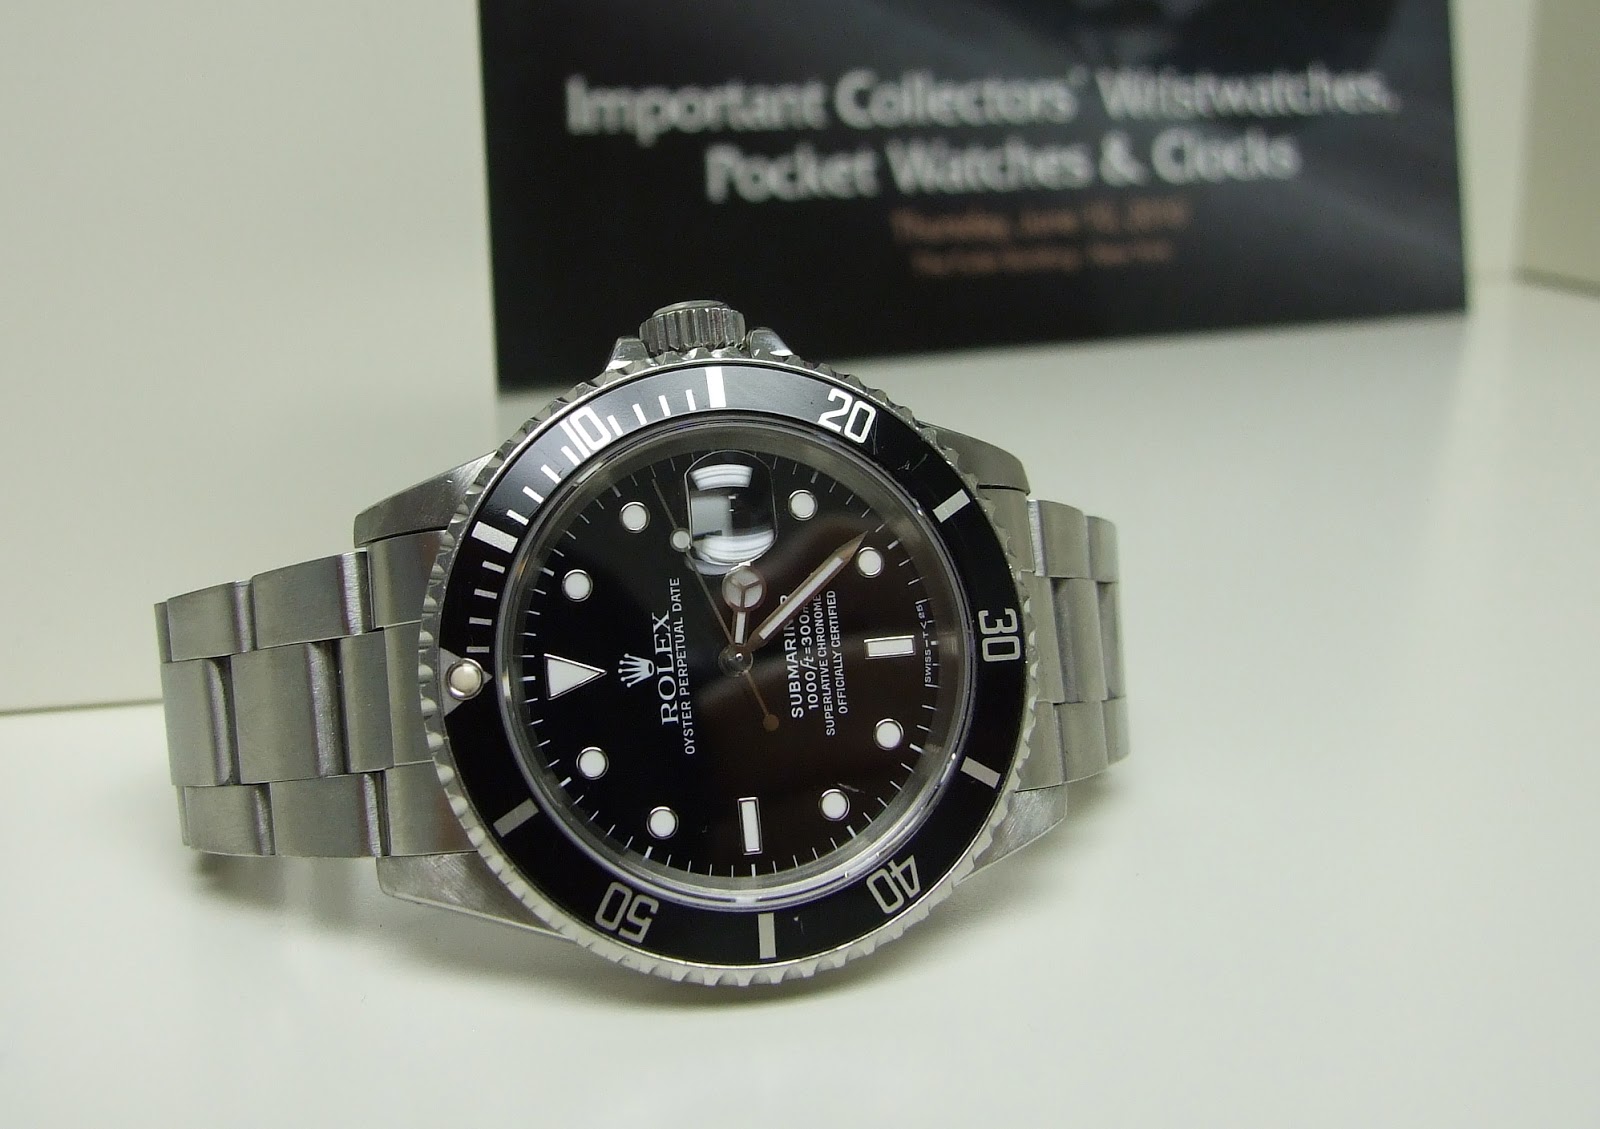 This is a very nice clean stainless steel Rolex Submariner 1991 Model